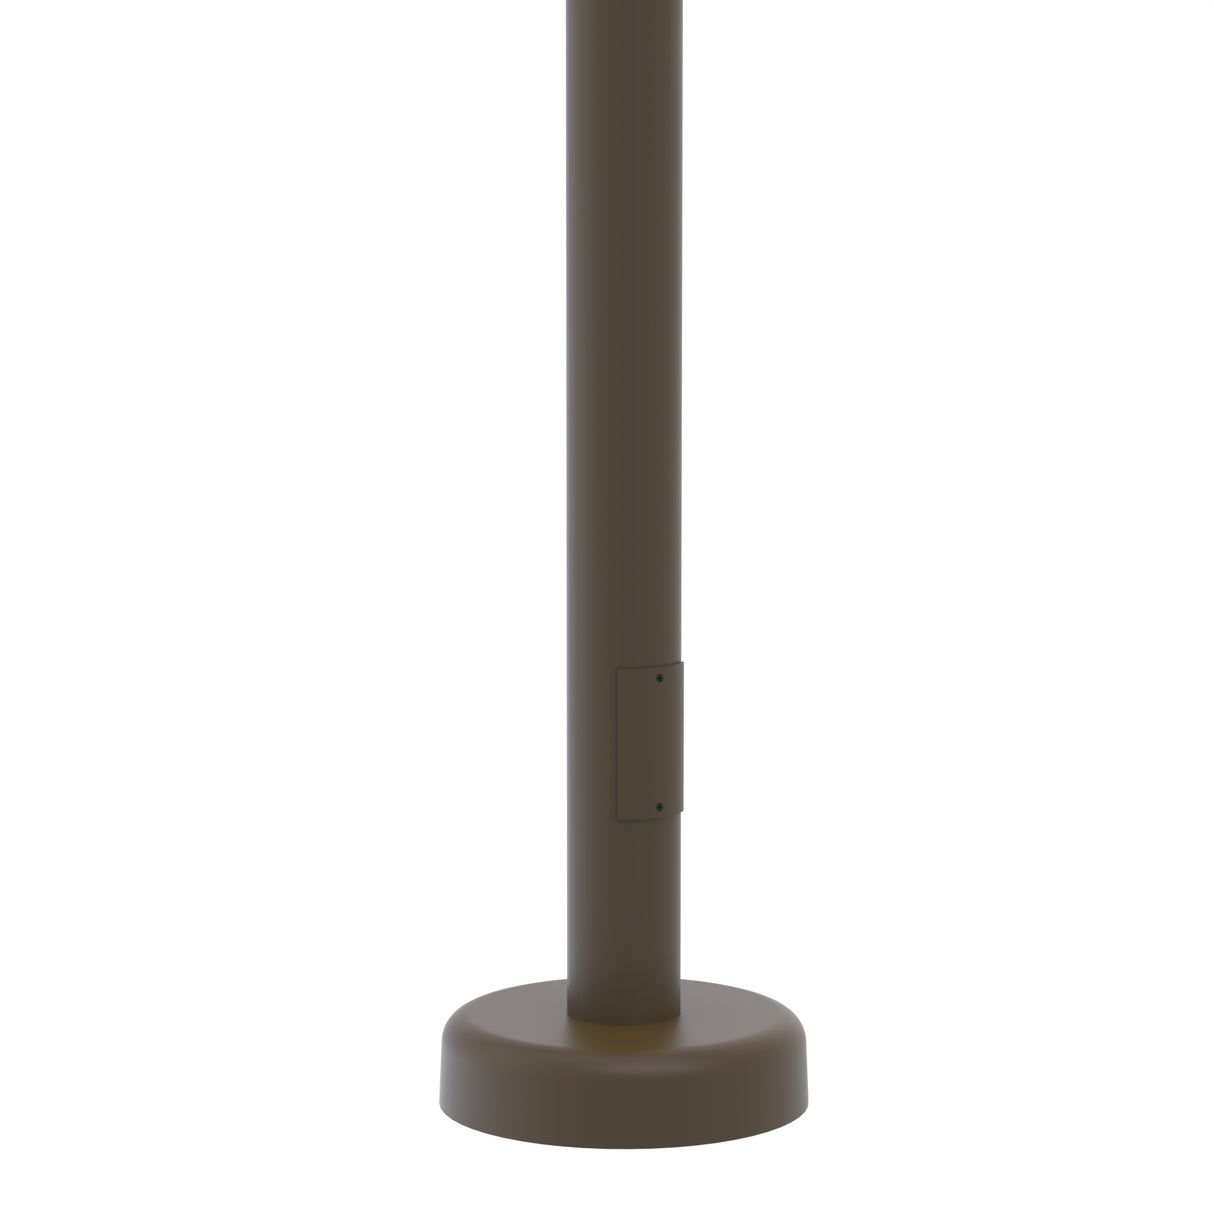 8' Tall x 4.0" OD x 0.125" Thick, Round Straight Aluminum, Hinged Anchor Base Light Pole